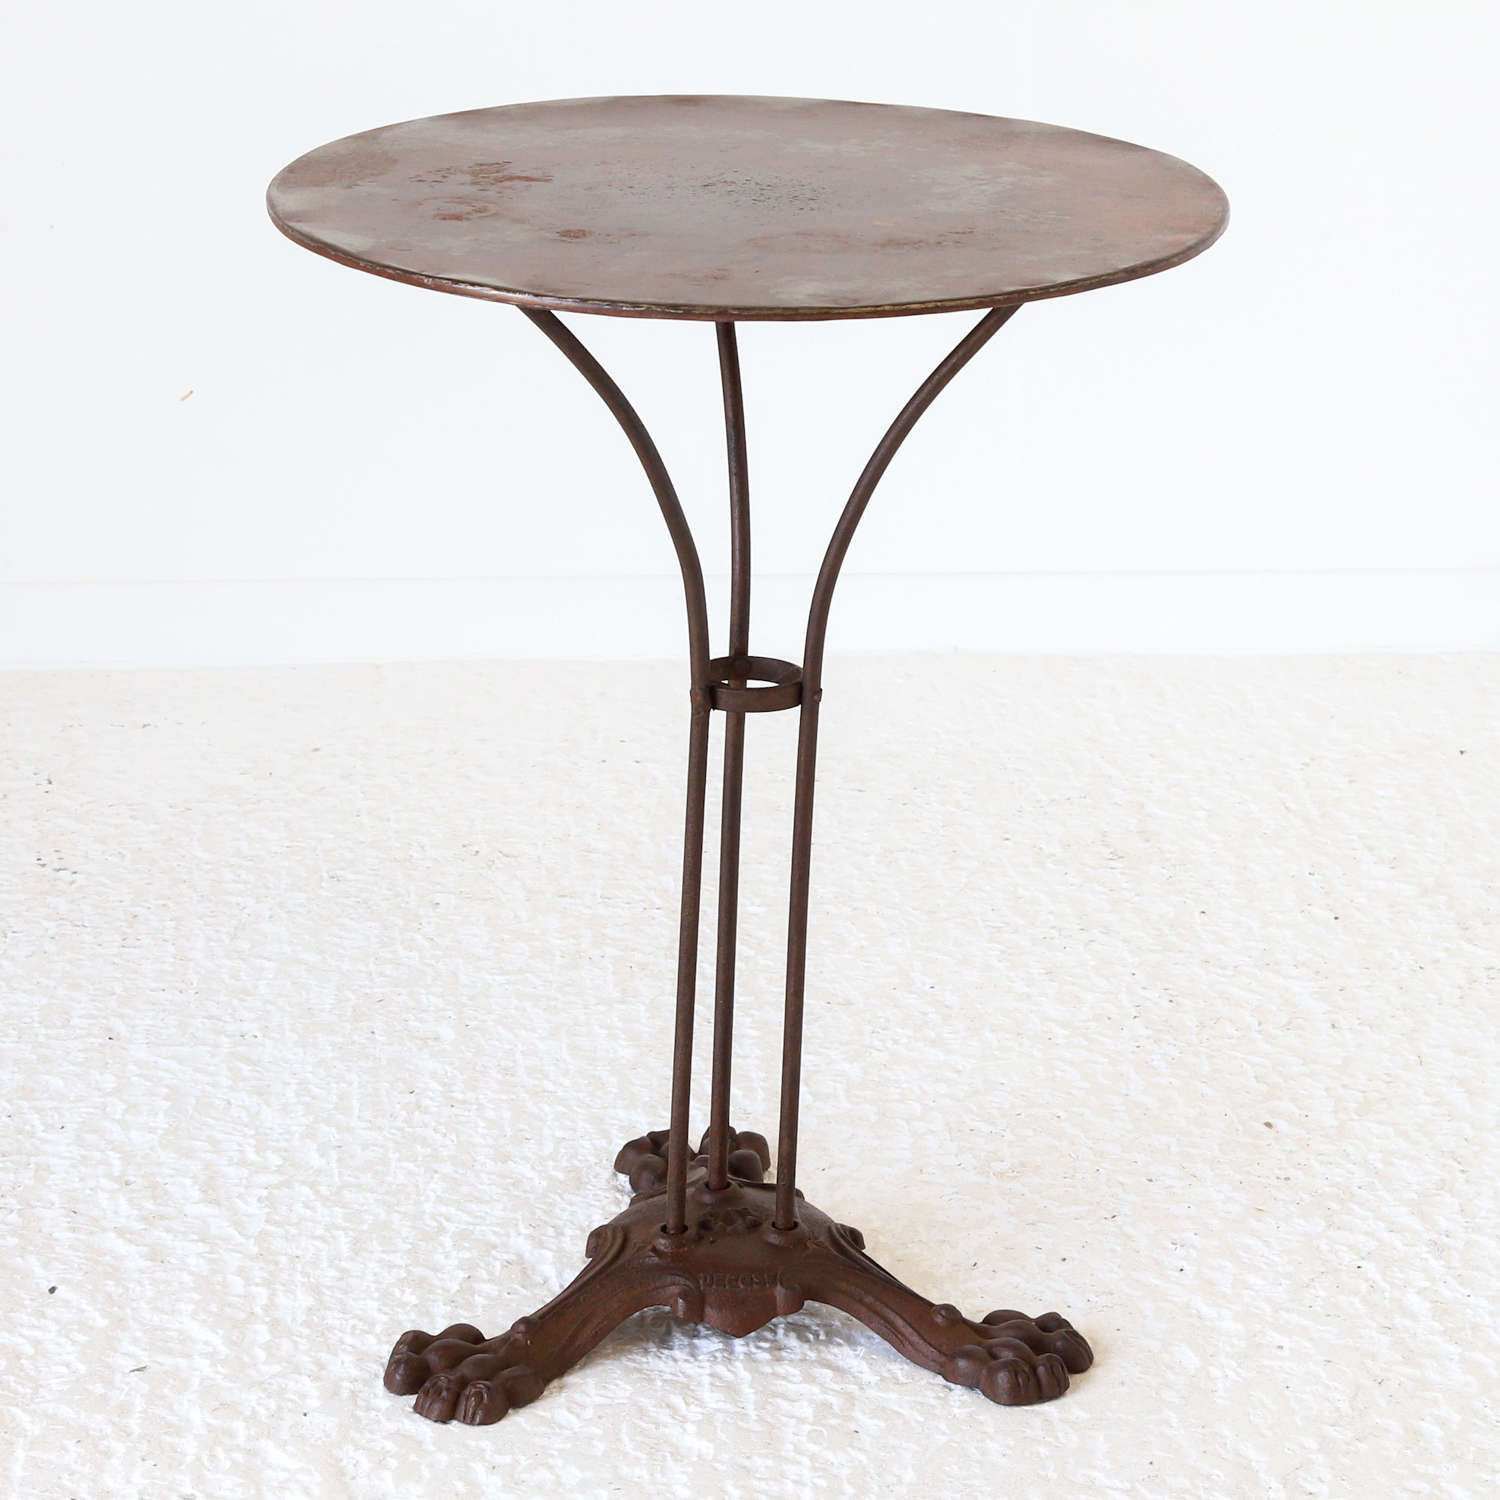 Circa 1880’s French Circular Cast Iron Bistro Table Stamped Depose